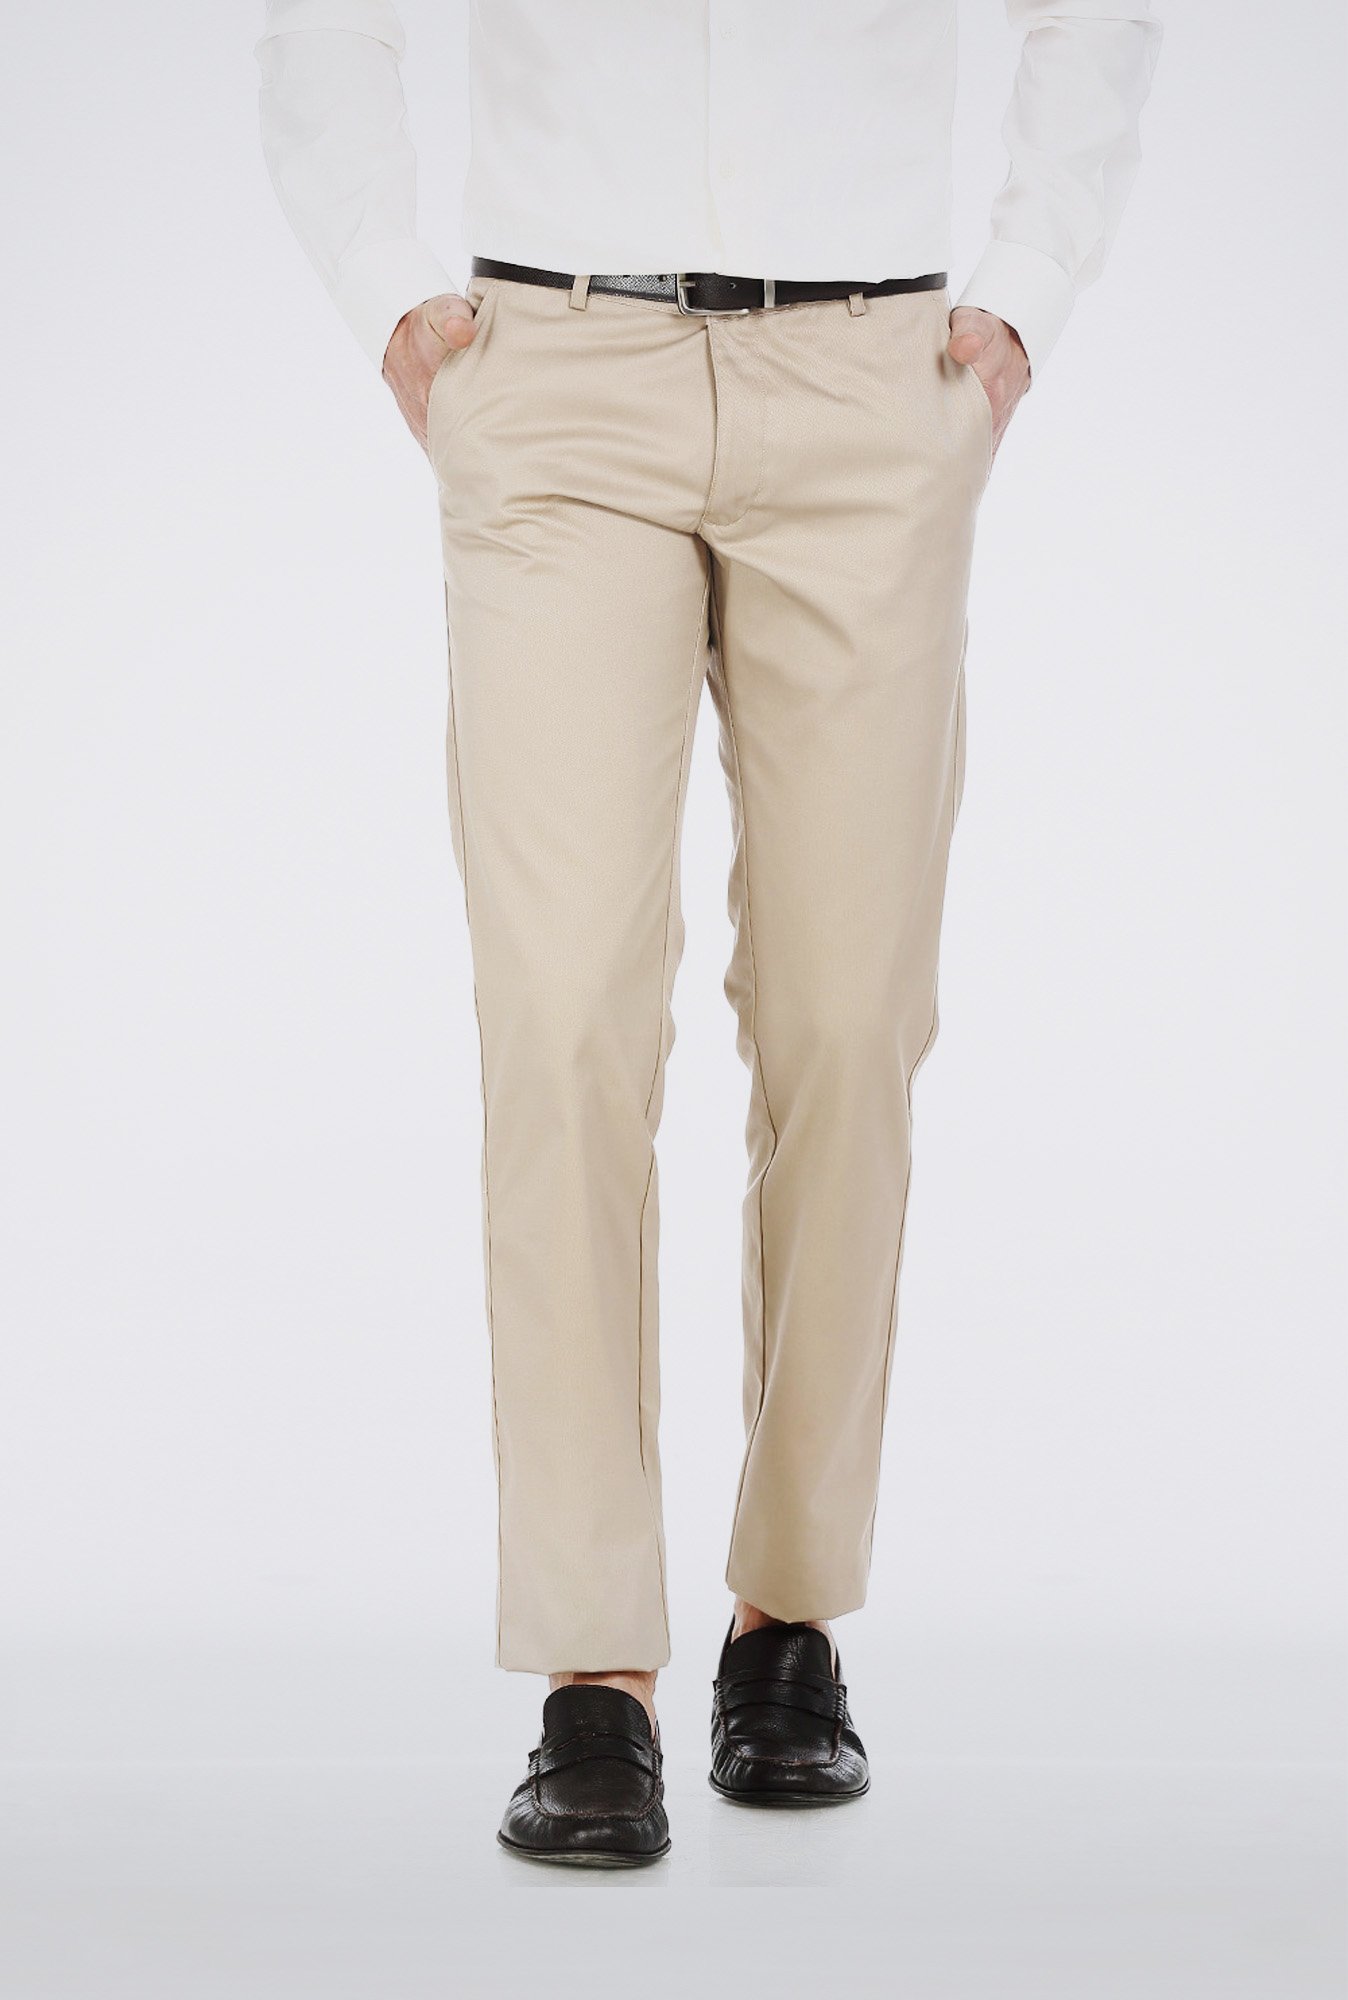 Brown All Weather Essential Stretch Pants